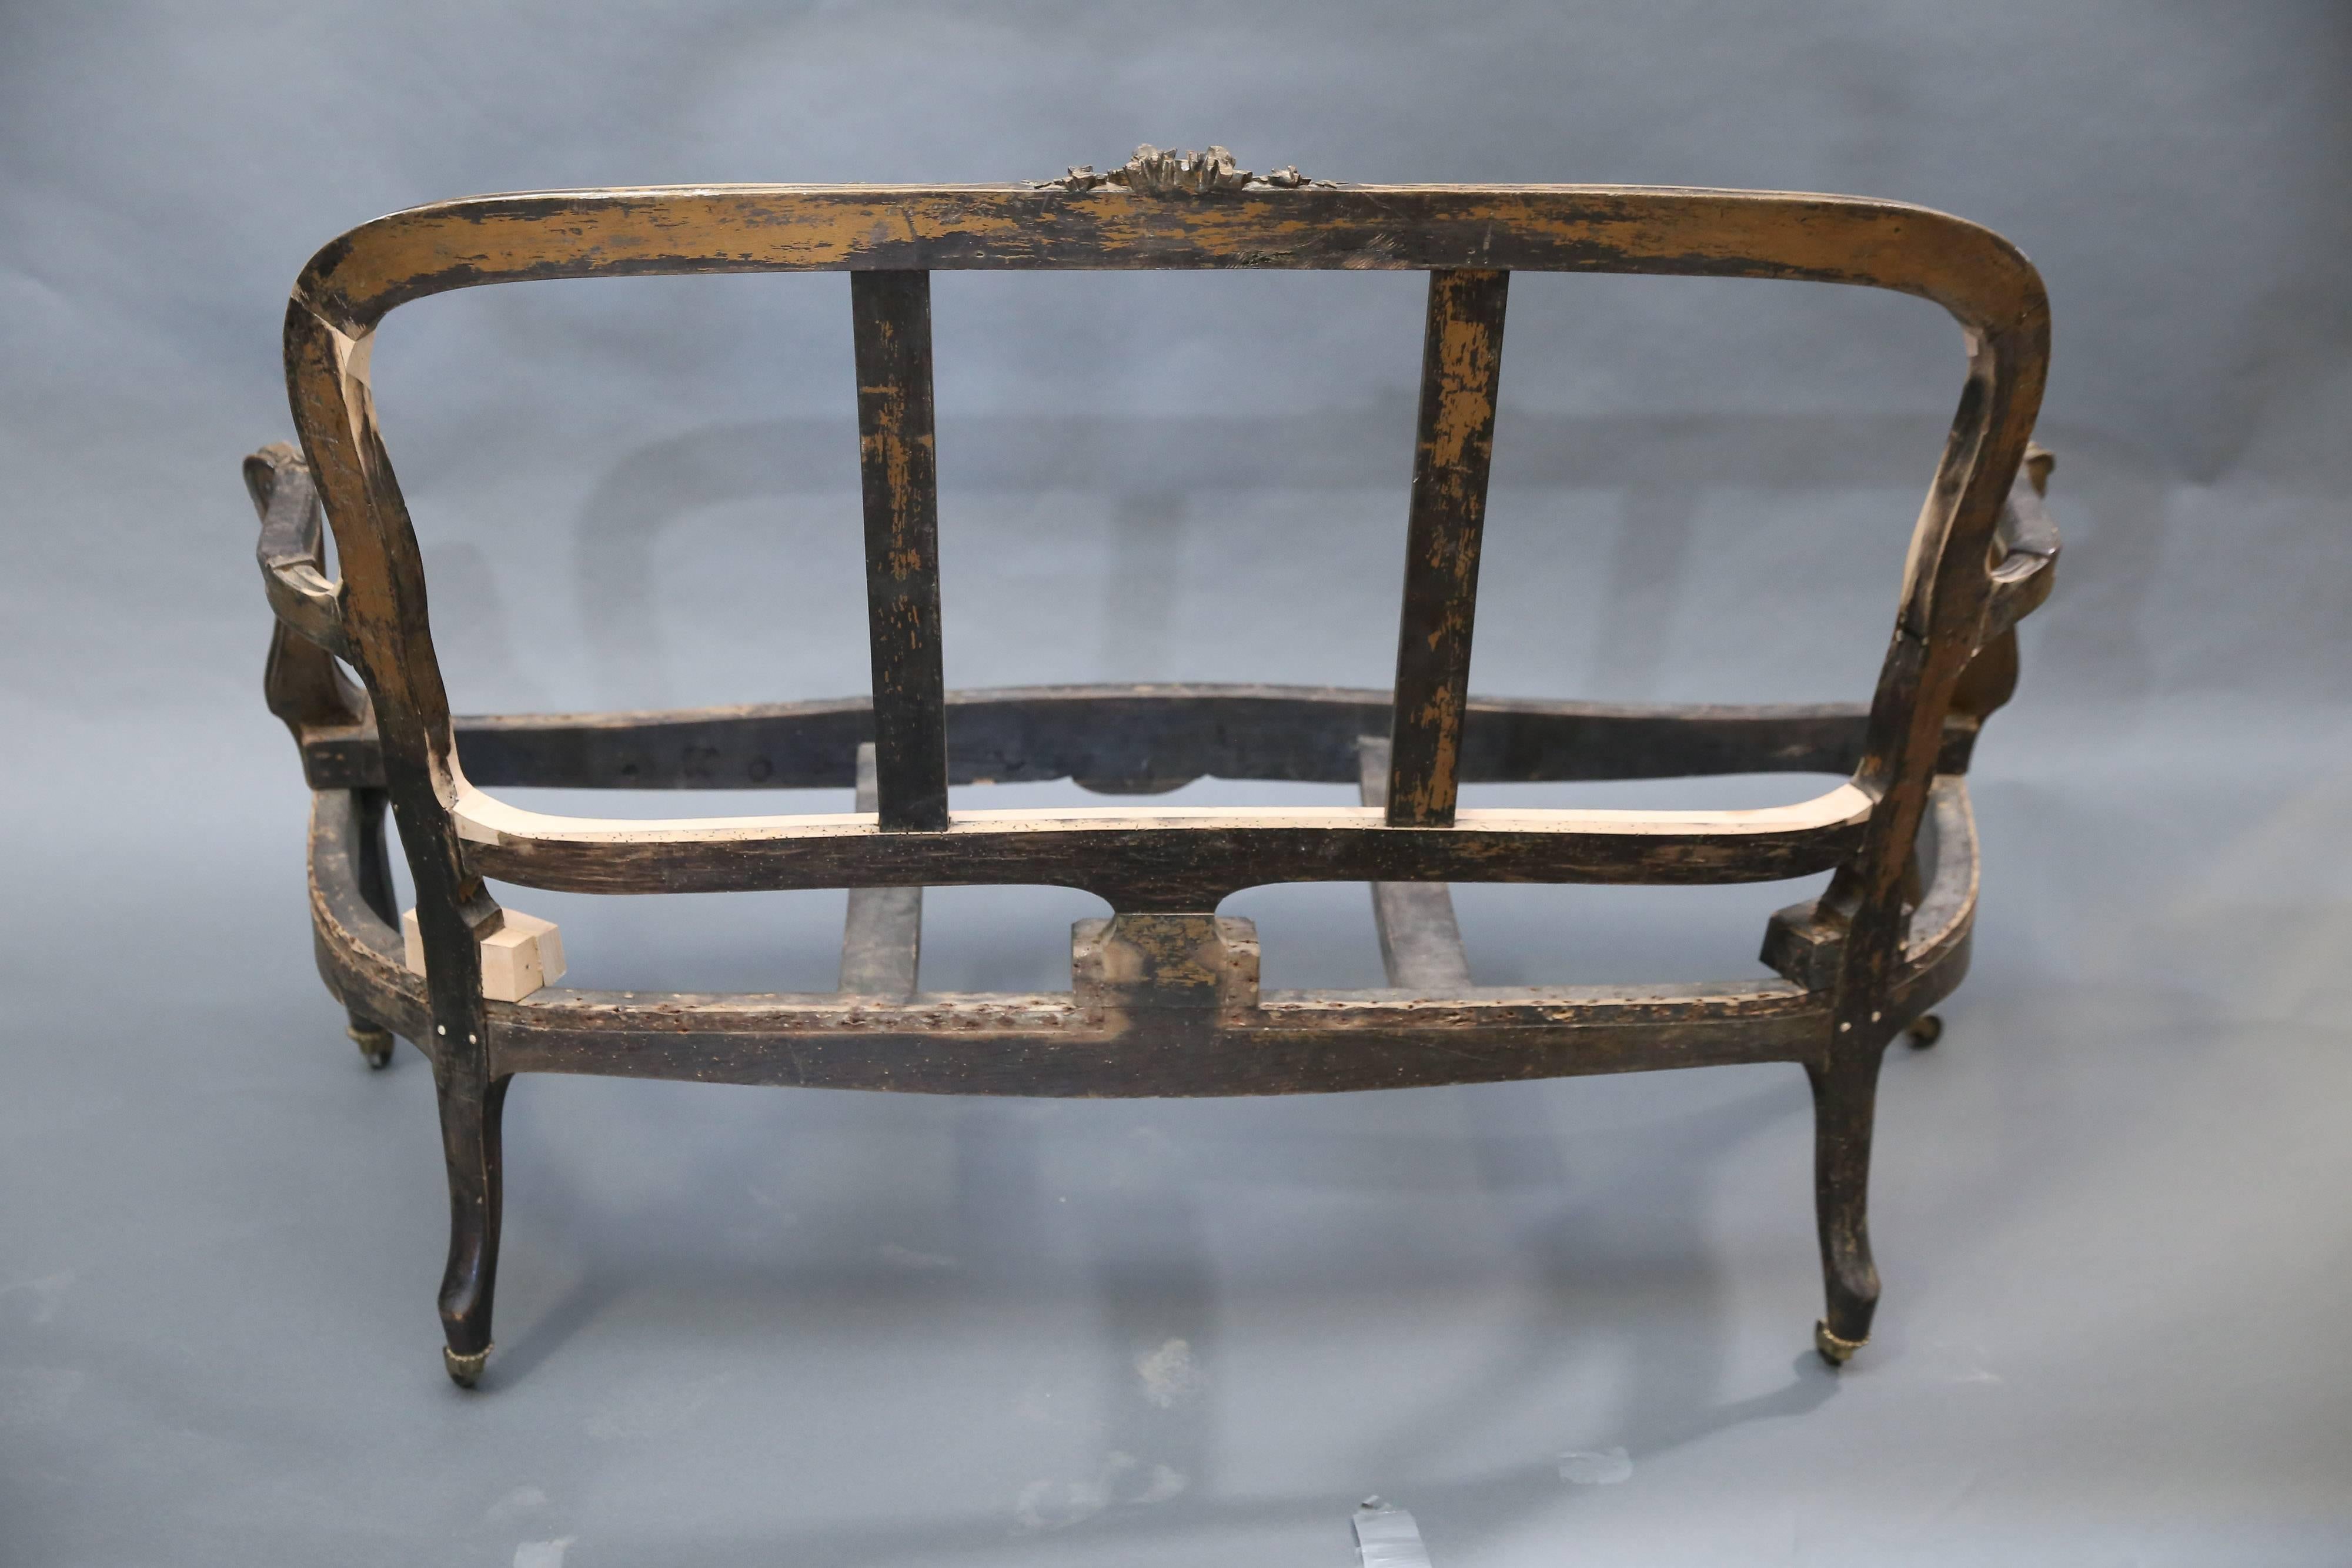 Fruitwood 19th Century Settee Frame with Original Paint Ready for Reupholstering